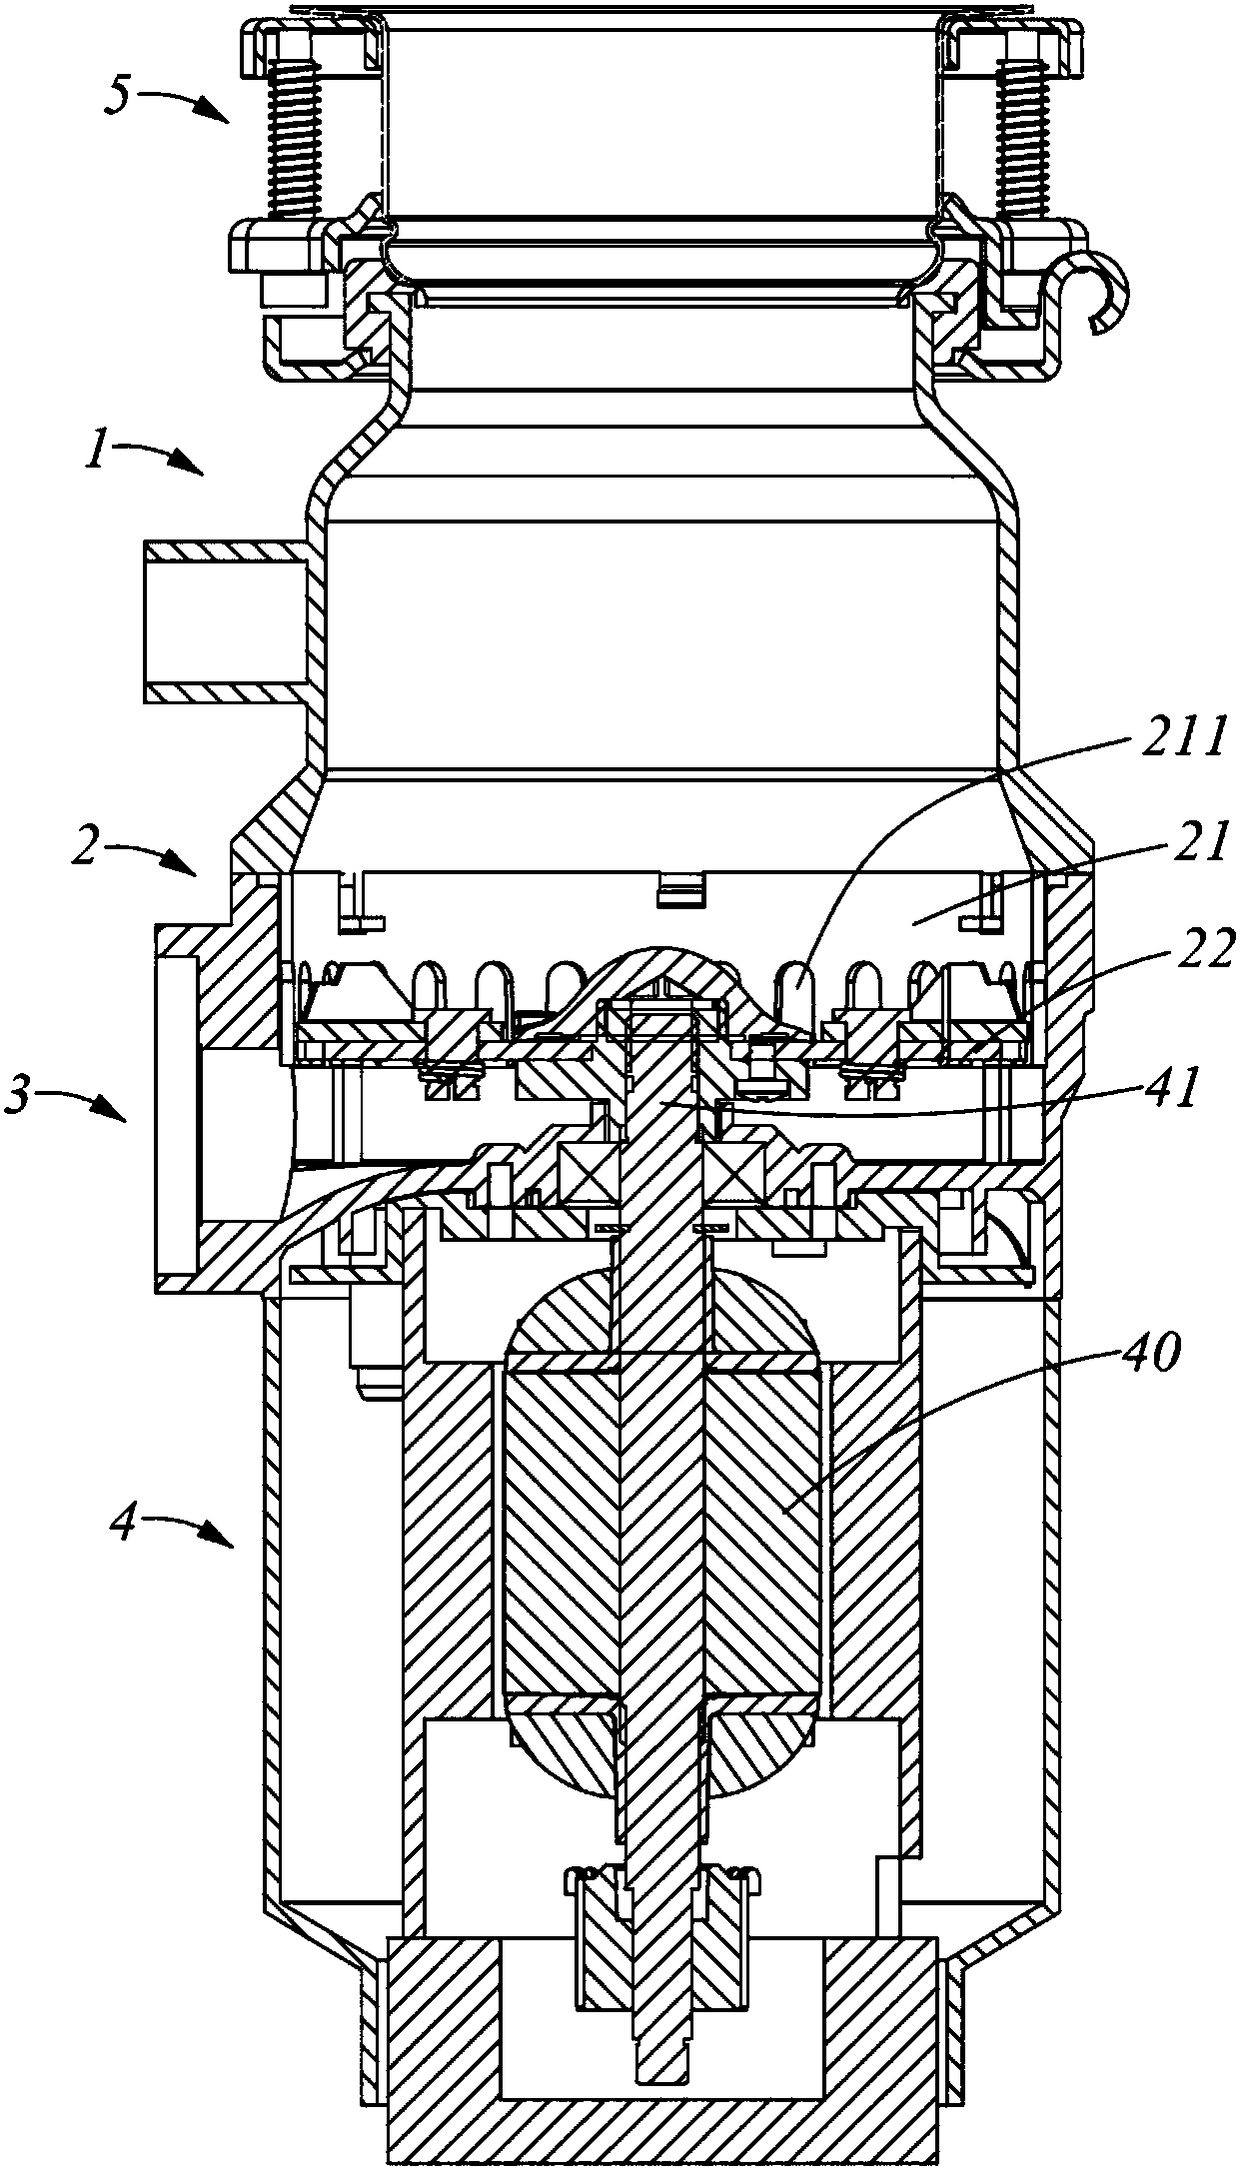 Food waste treating device